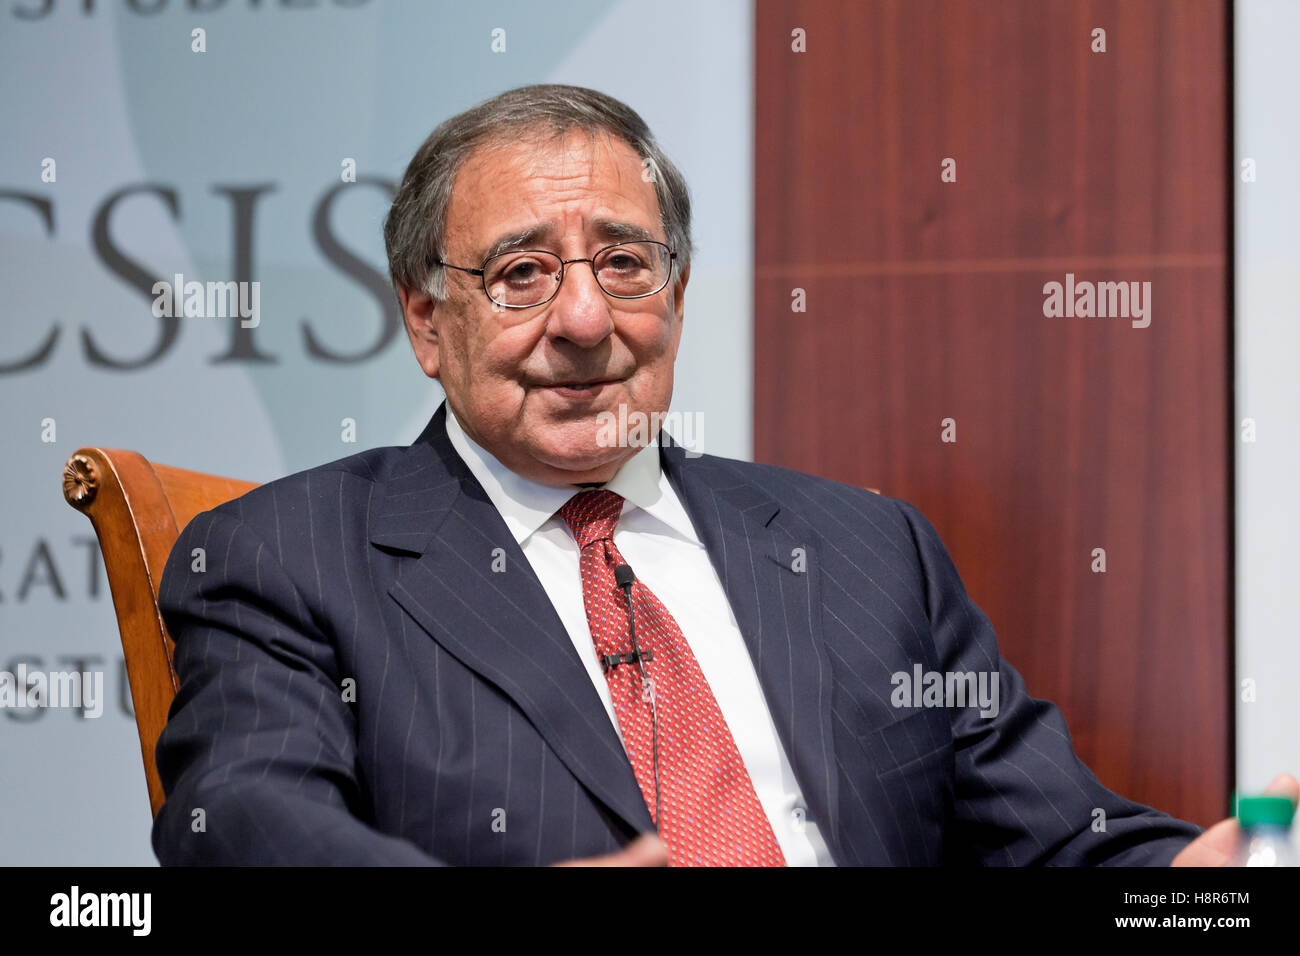 Washington, DC, USA. , . Former Secretary of Defense and Director of CIA, Leon Panetta, speaks at Center for Strategic & International Studies on 'Turning Point - A New Comprehensive Strategy for Countering Violent Extremism' program launch. Credit:  B Christopher/Alamy Live News Stock Photo